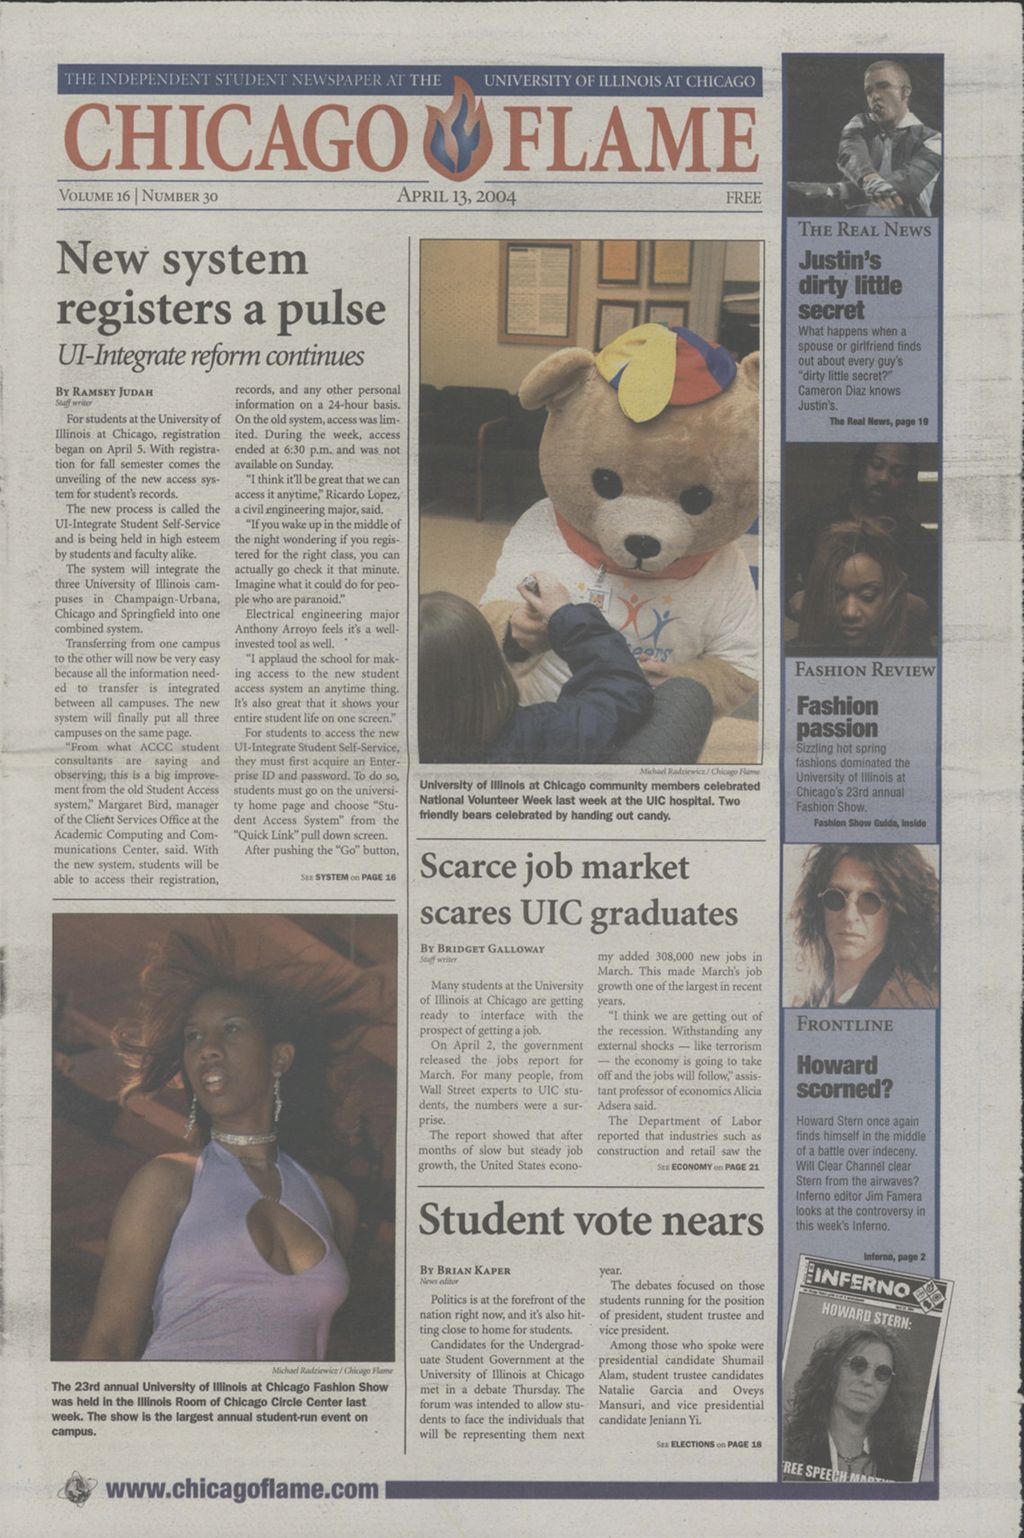 Chicago Flame (April 13, 2004)